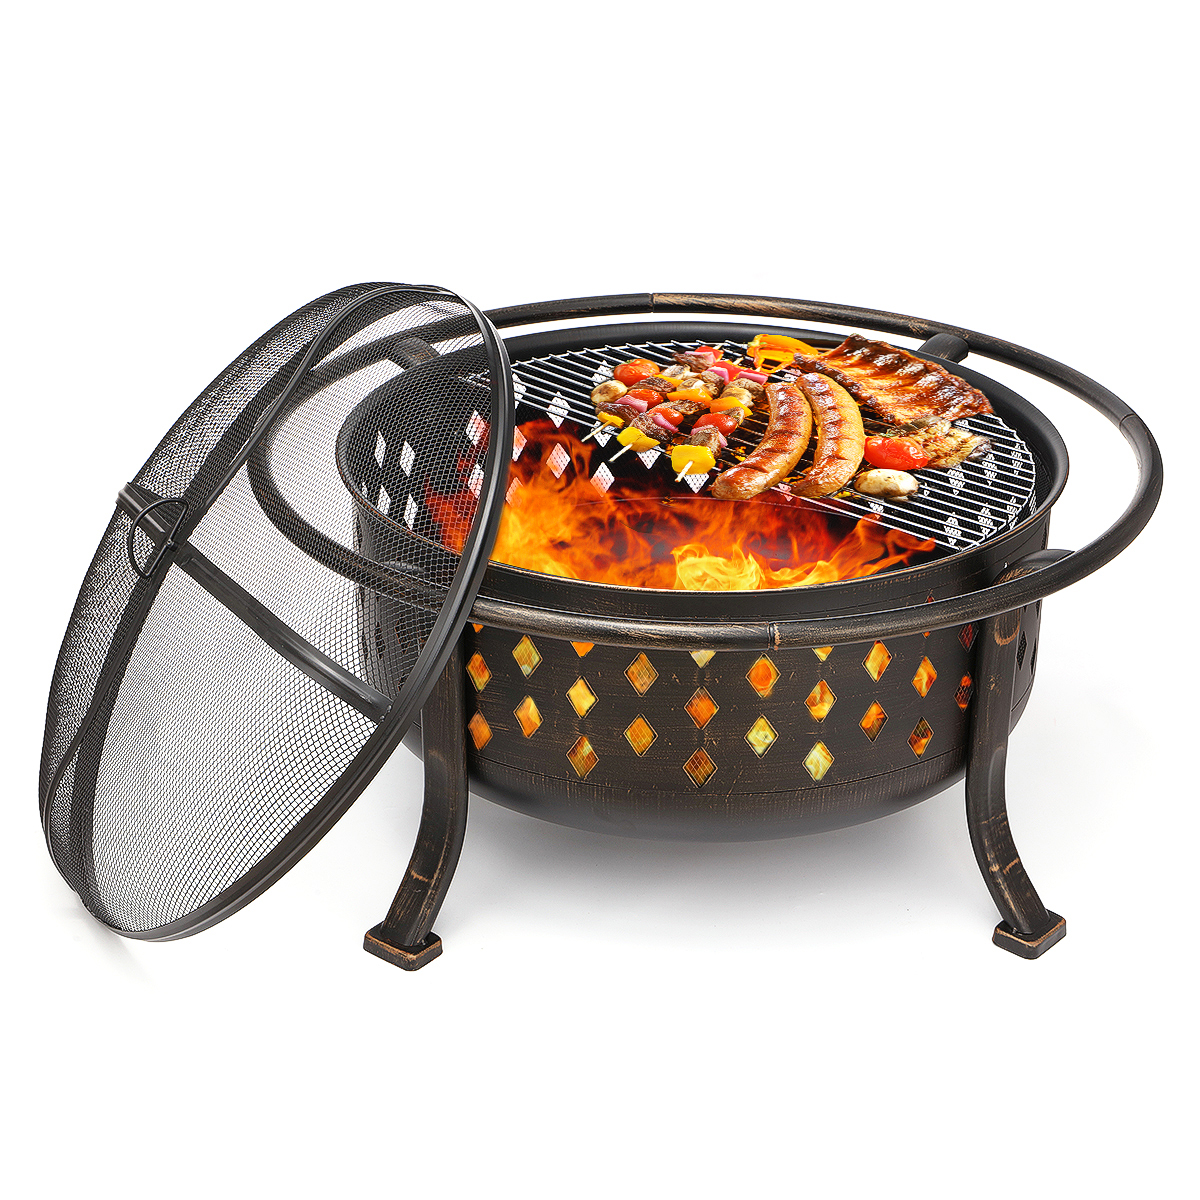 KingSo 36" Fire Pits for Outside Wood Burning Fire Pit Outdoor Firepit Square Large Bowl with Ash Plate Spark Screen Log Grate Poker for Camping Backyard Bonfire Patio - image 1 of 7